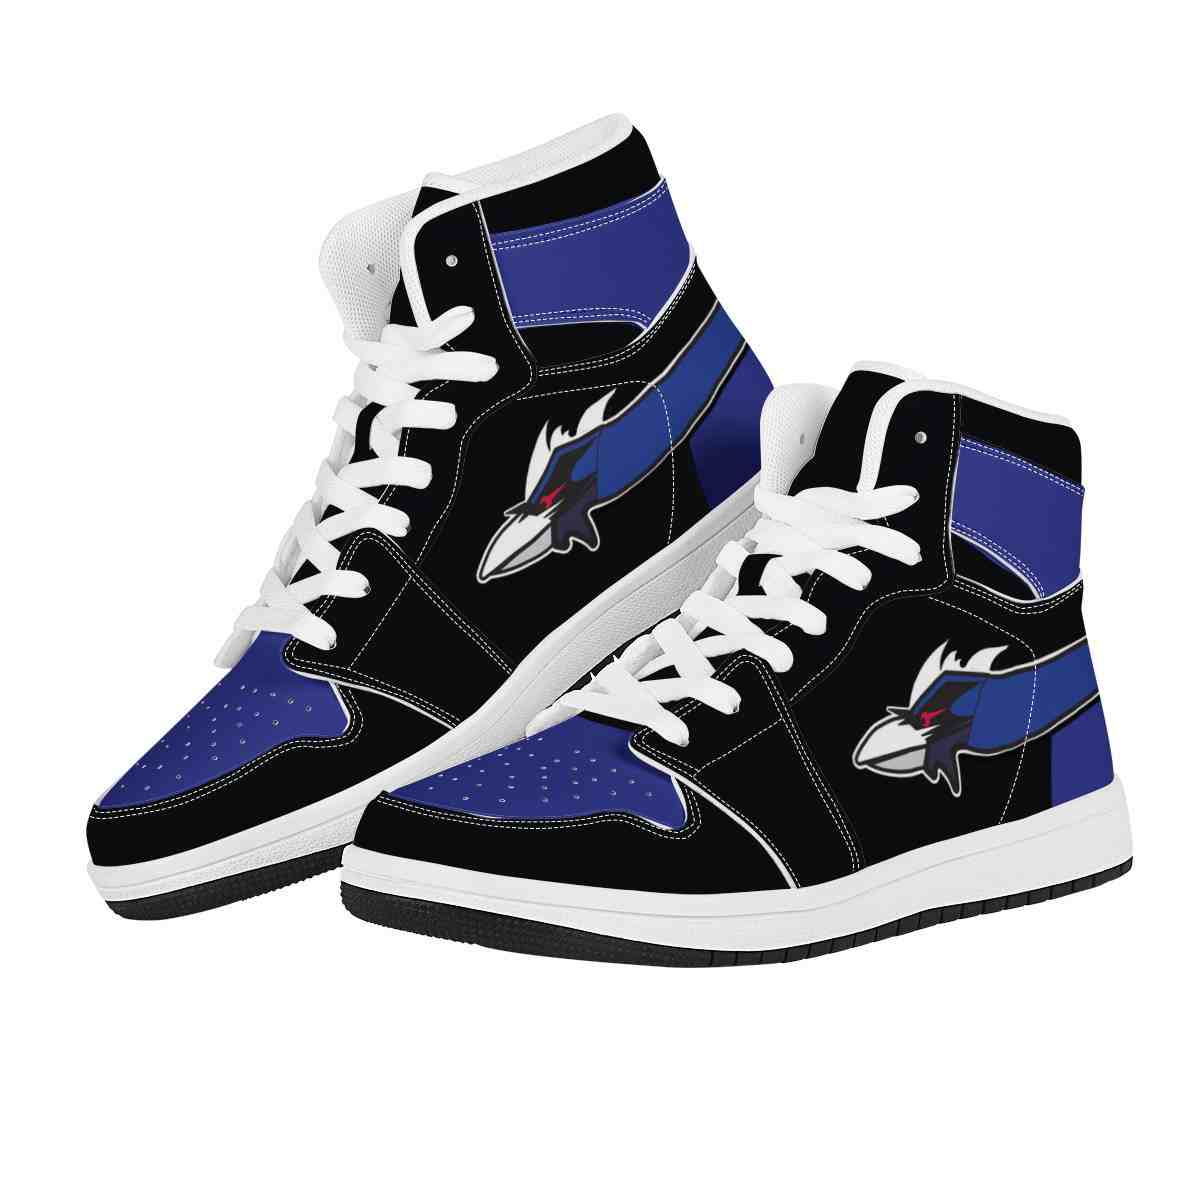 NFL Customized  shoes Baltimore Ravens High Top Leather AJ1 Sneakers 001 Customized  shoes